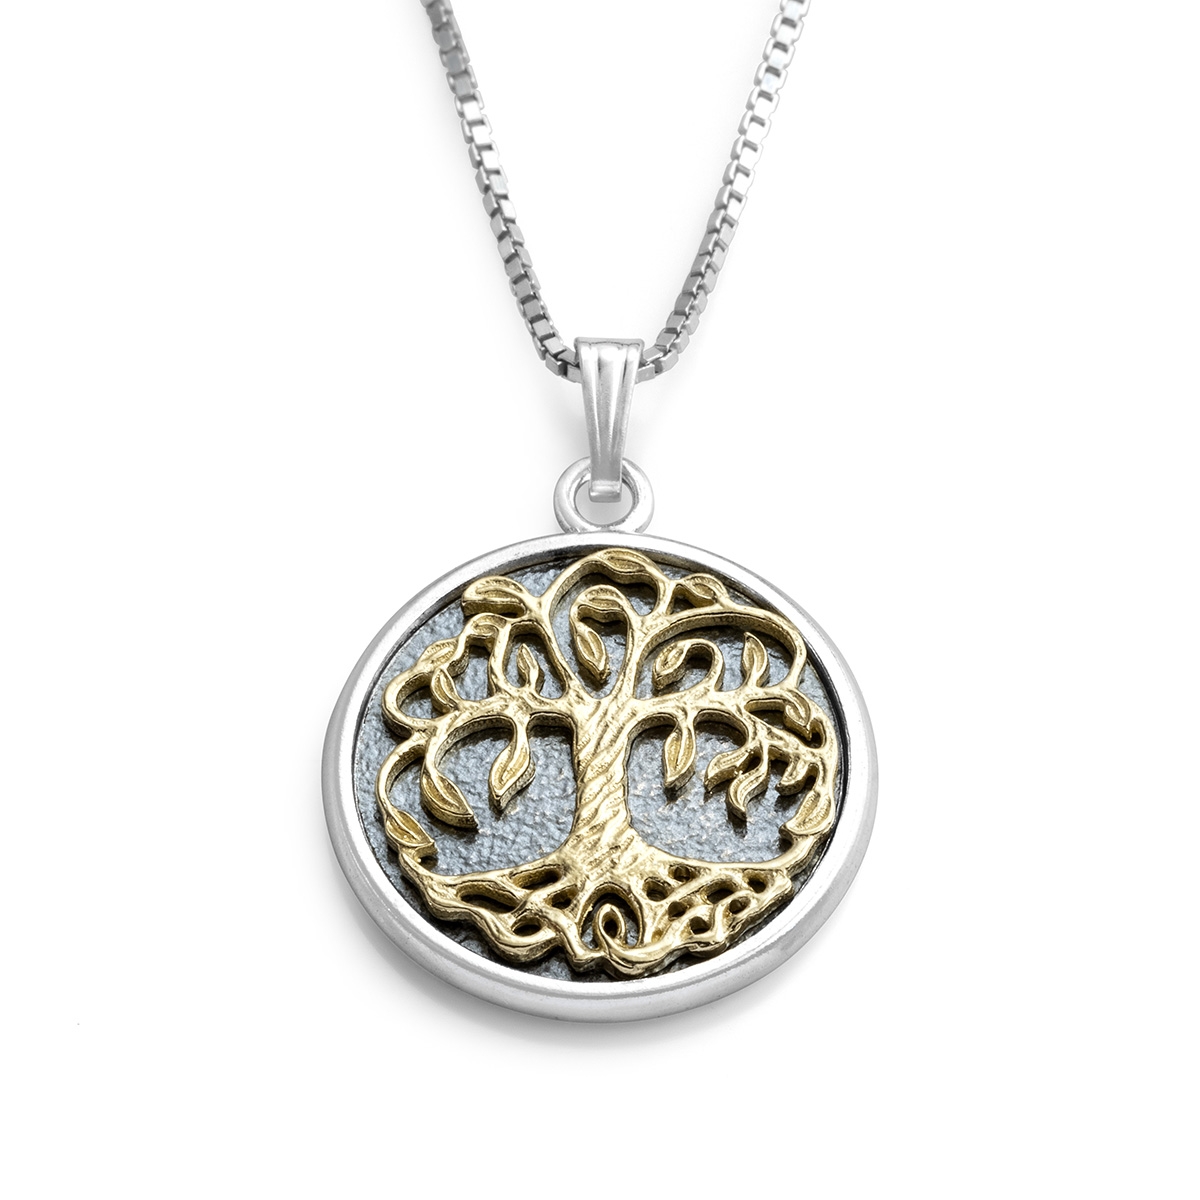 Handcrafted Sterling Silver and 14K Gold Tree of Life Necklace - 1